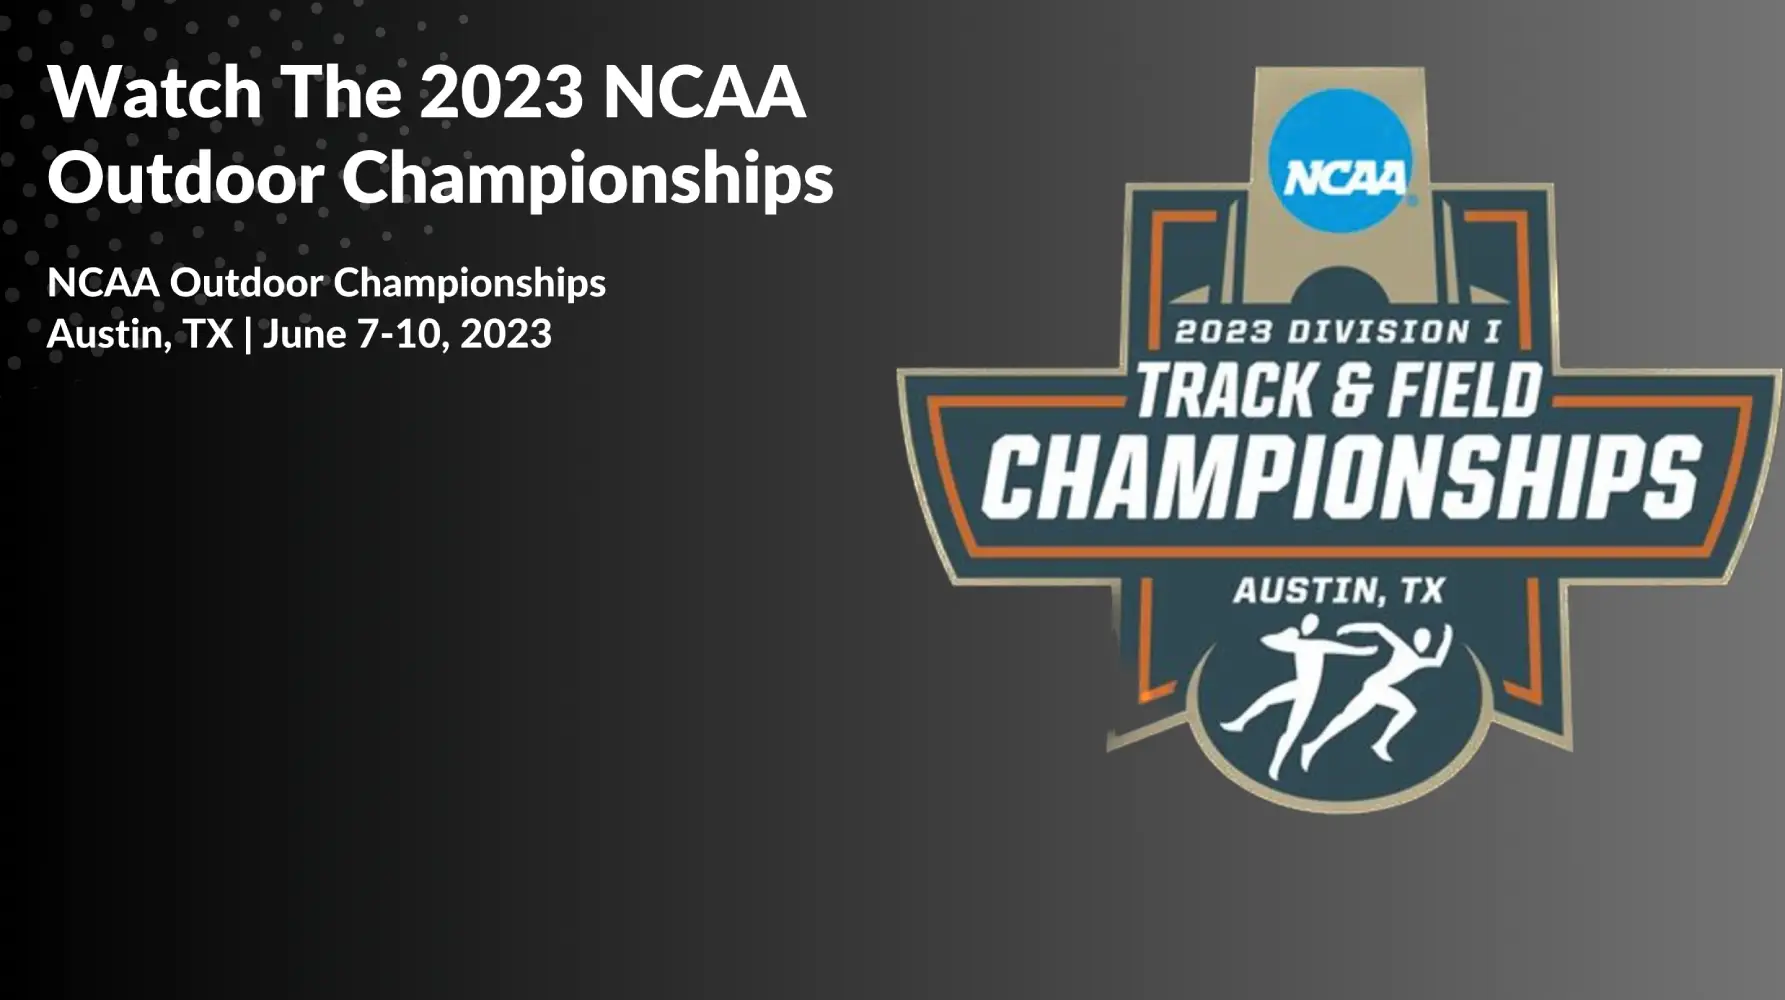 Where is the 2023 NCAA Outdoor Championships, how to watch live?